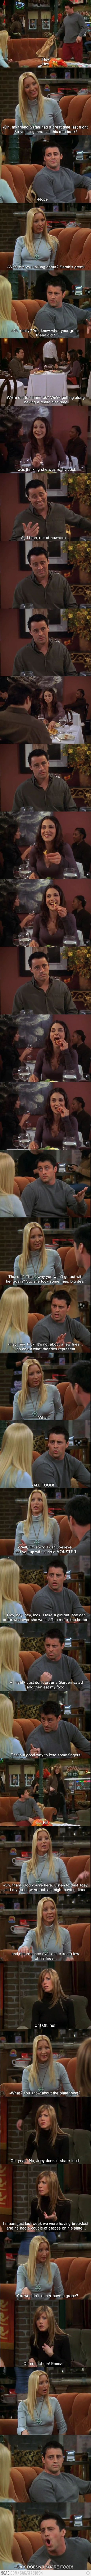 JOEY DOESN'T SHARE FOOD!!